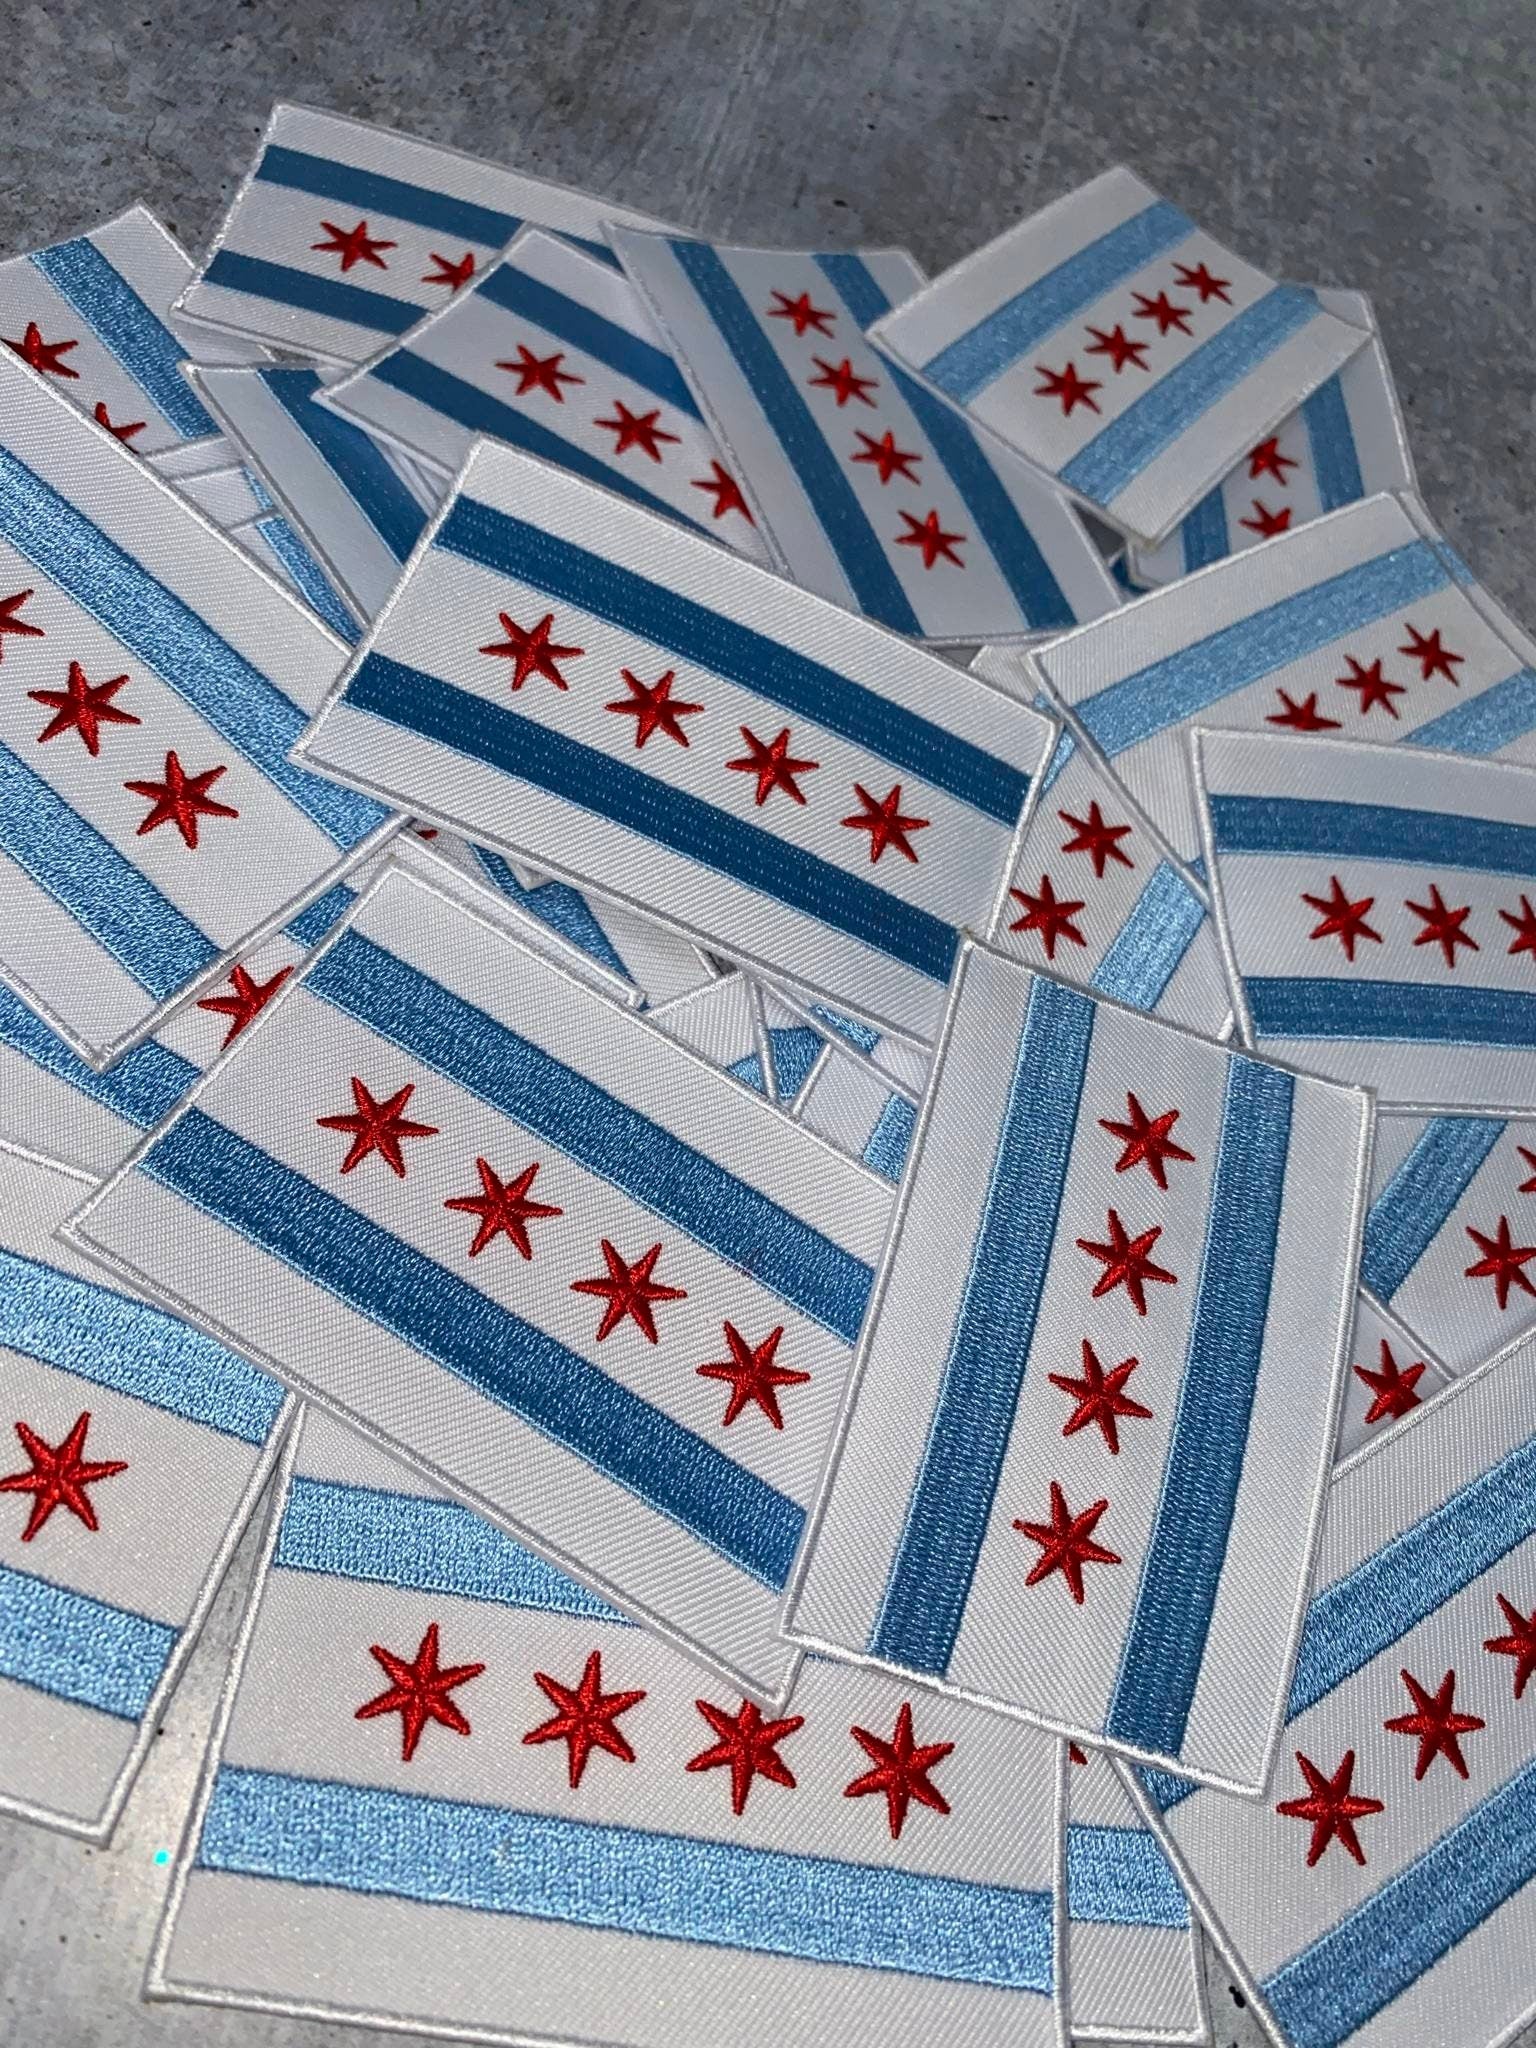 Collectable "Chicago Flag" Iron-On Embroidered Patch; Popular City, Chicago City Flag, Flag Day, Red/White/Blue Flag, 1-pc, Sz. 3.25"x2.15"